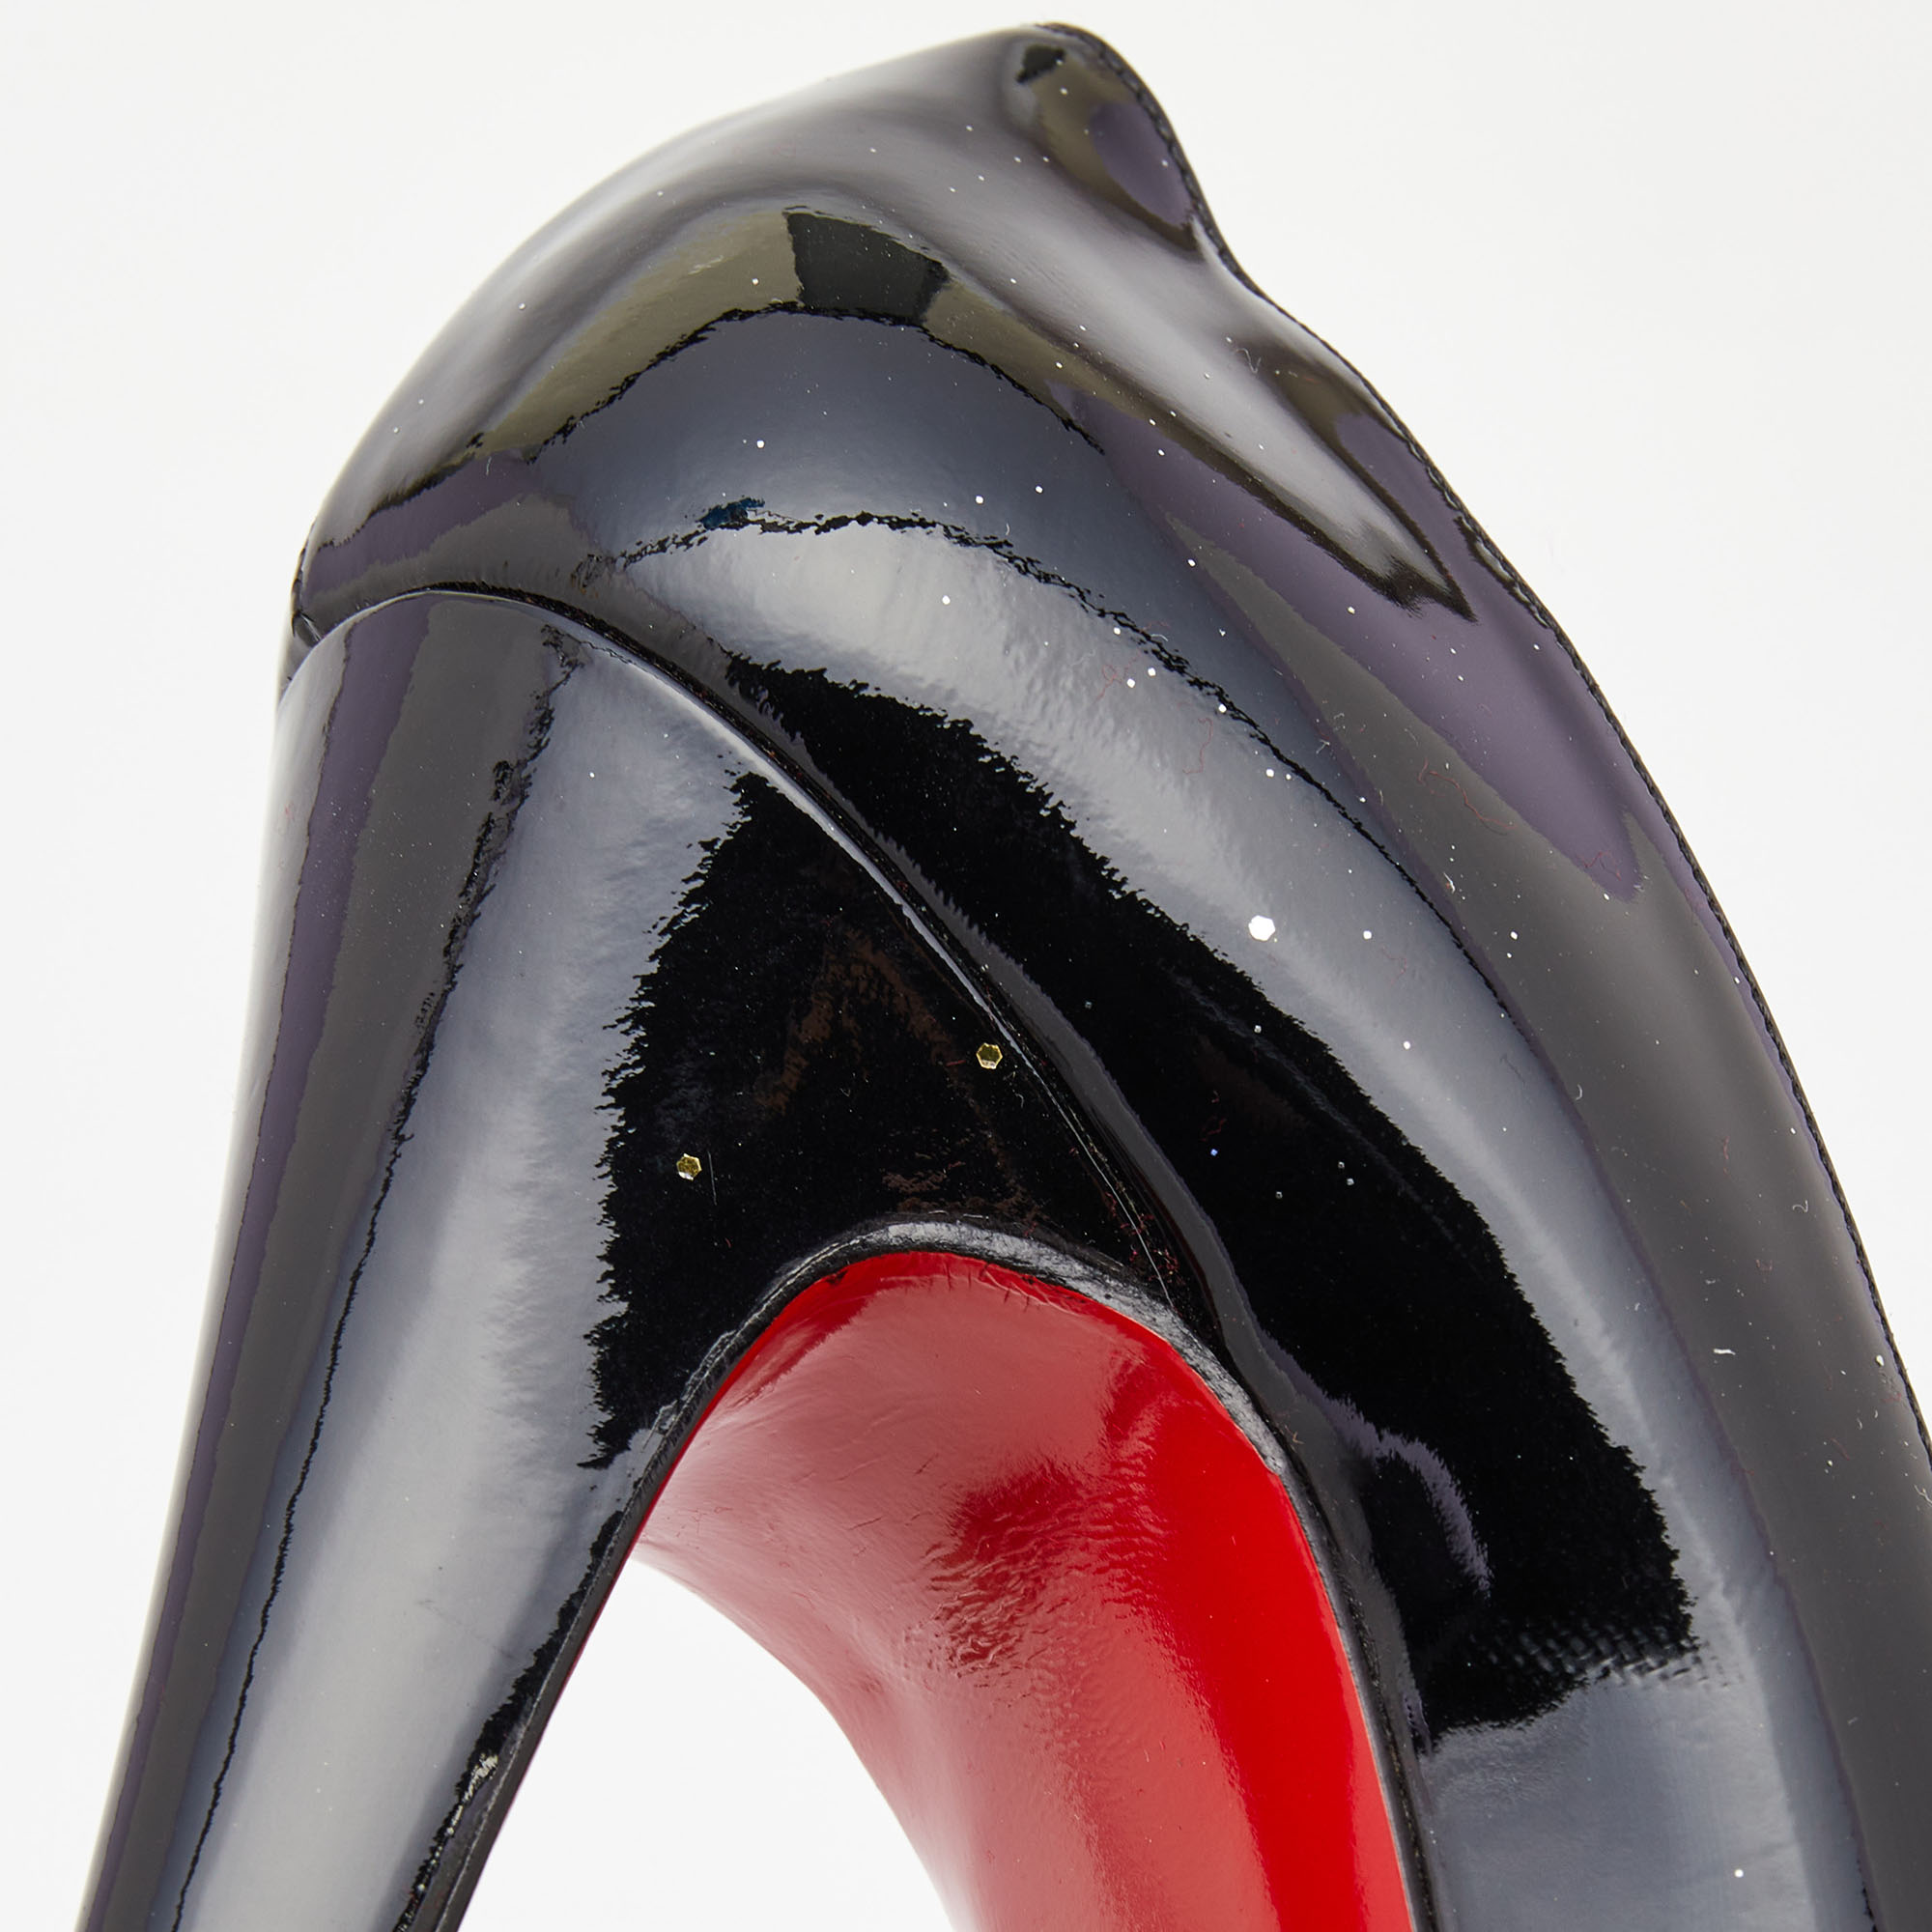 Christian Louboutin Black Patent Leather Highness Pumps Size 39.5